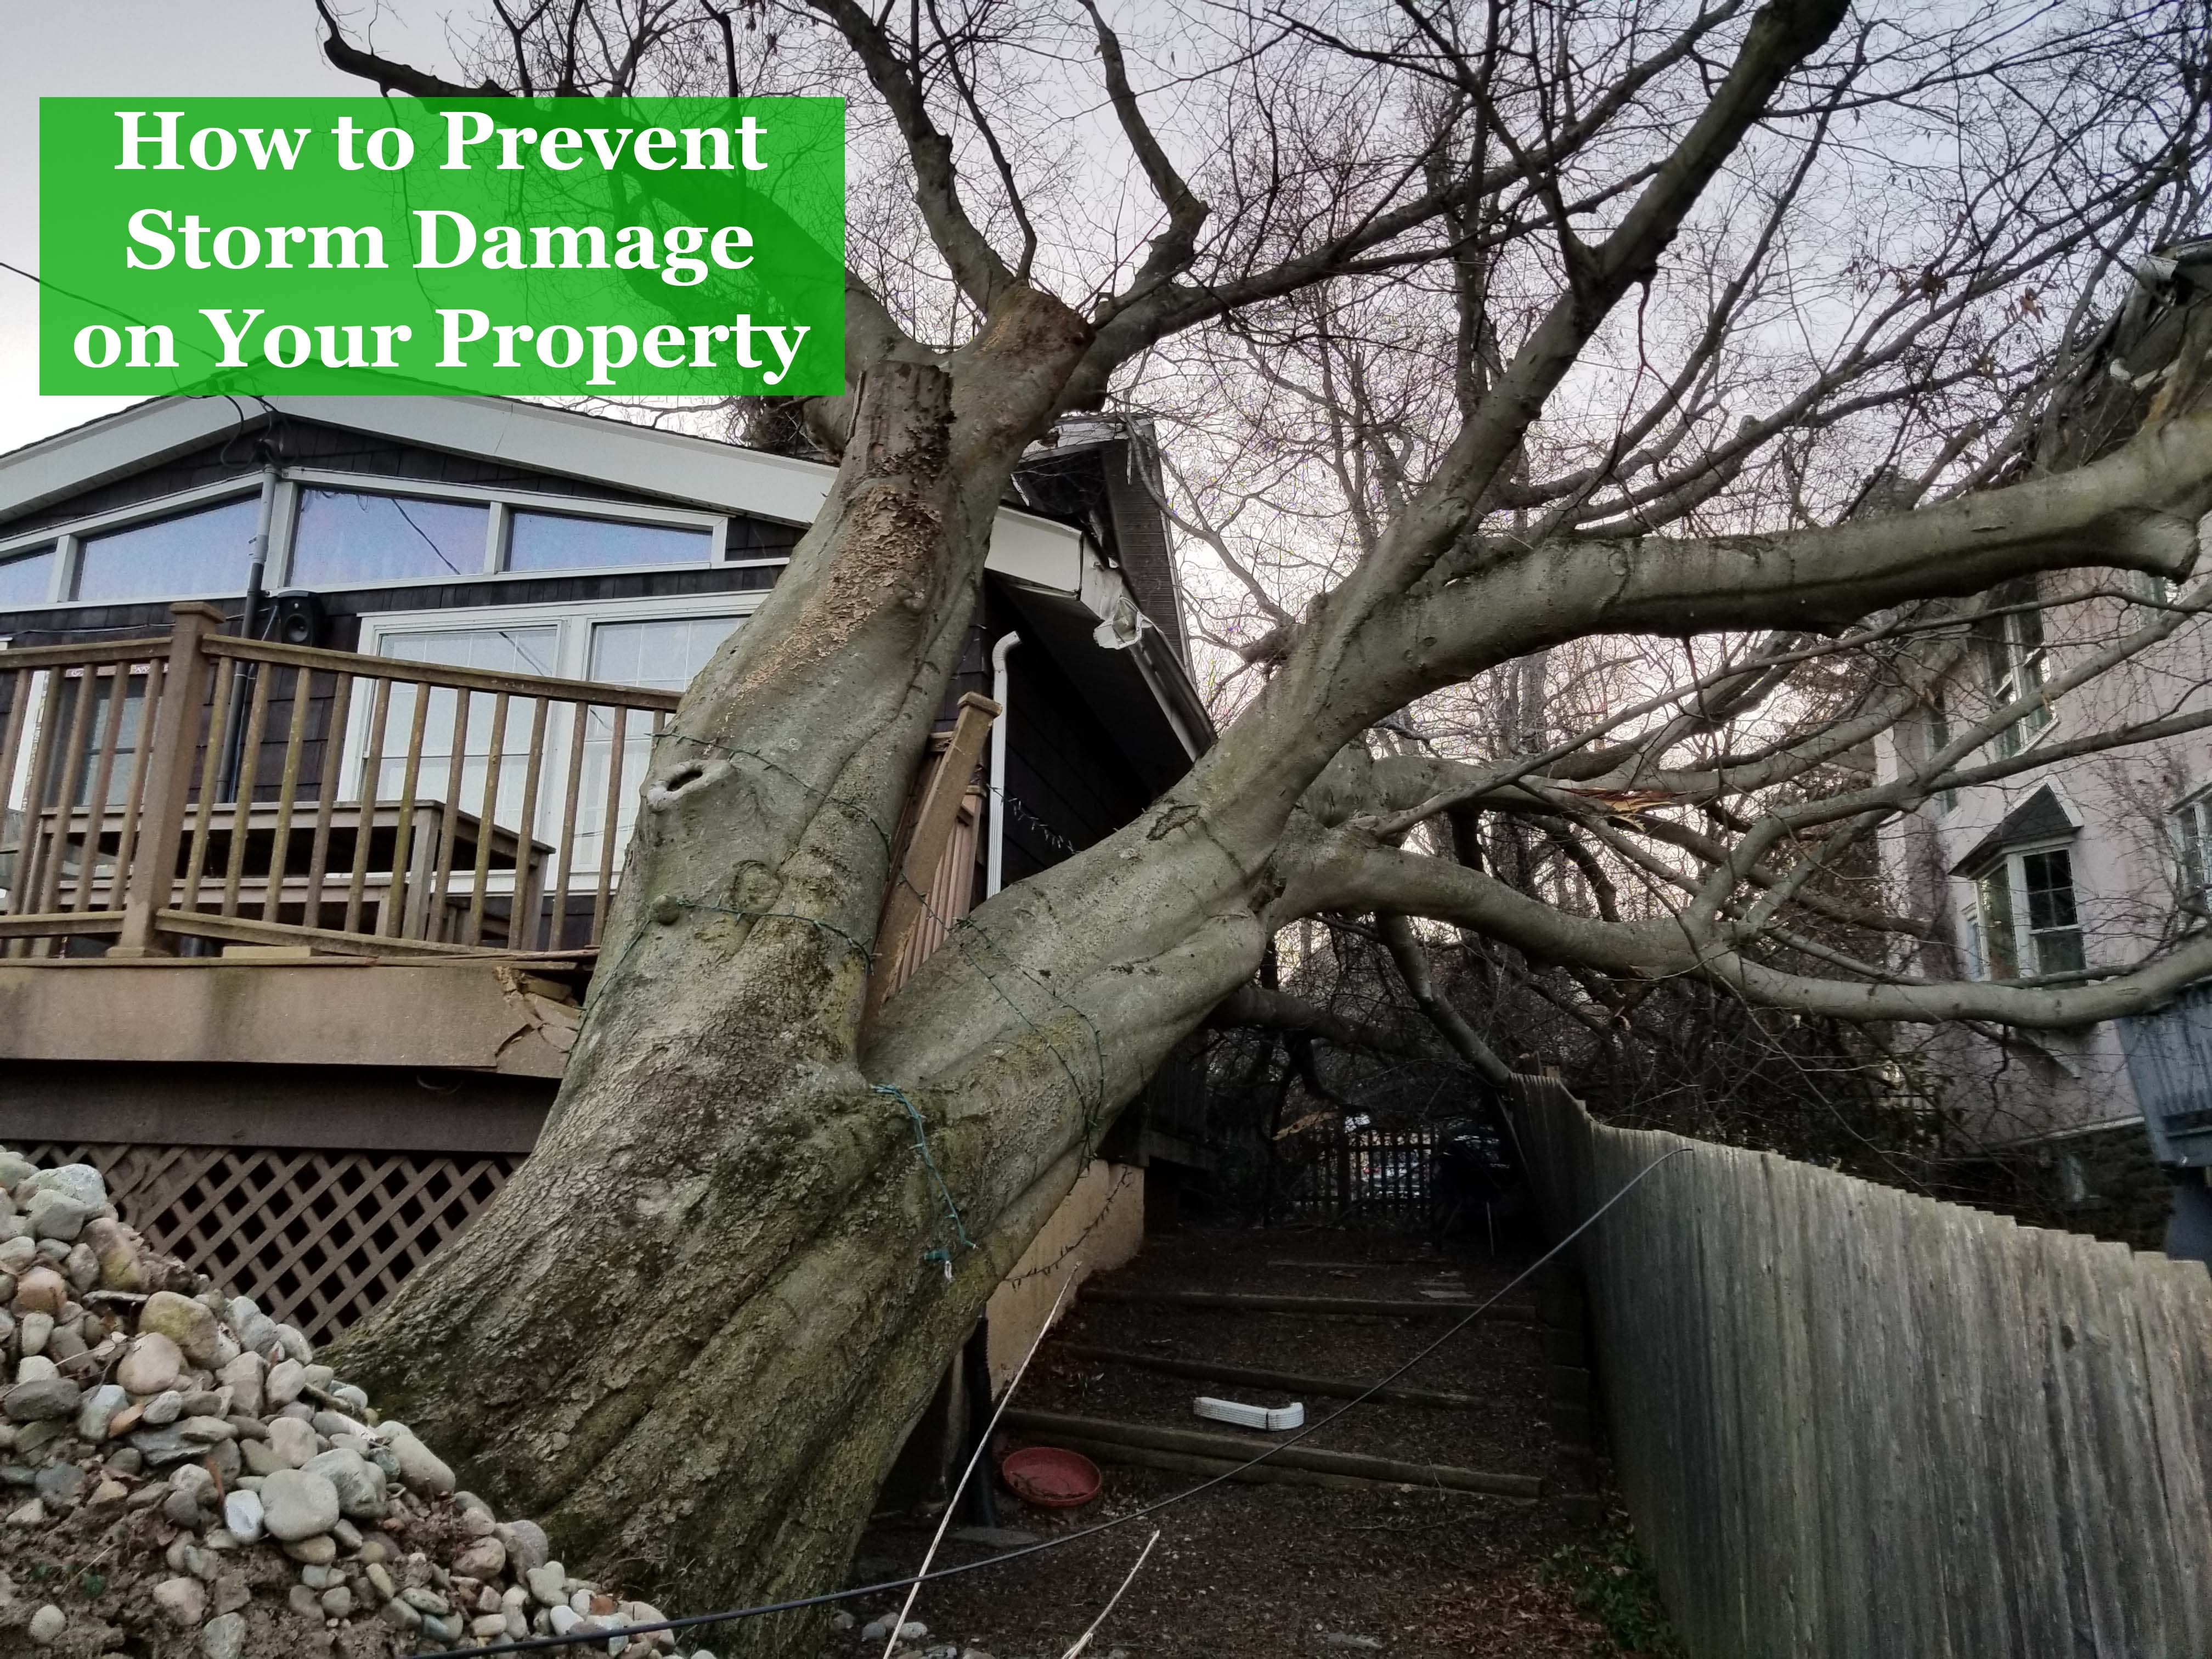 How to prevent storm damage on your property